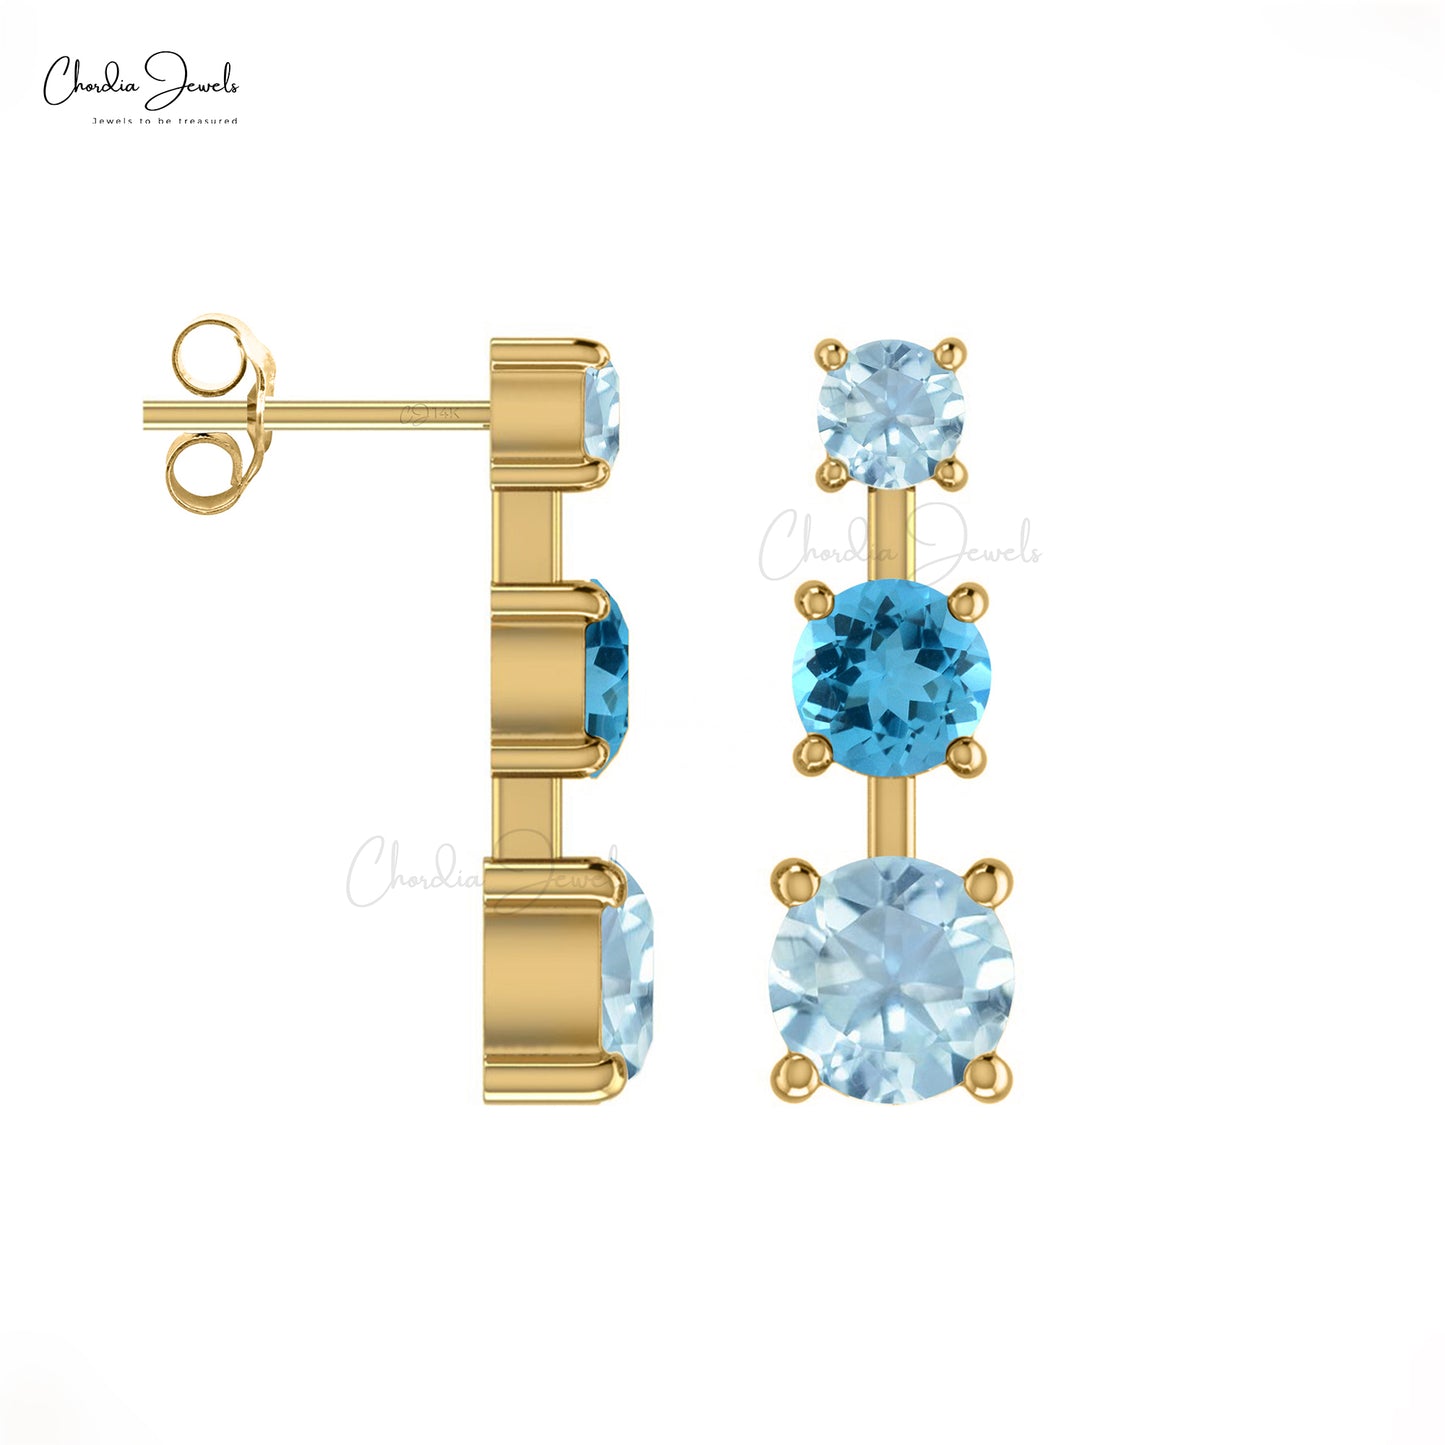 Natural Swiss Blue Topaz & Aquamarine Unique 14k Real Gold 3-Stone Earrings For Her